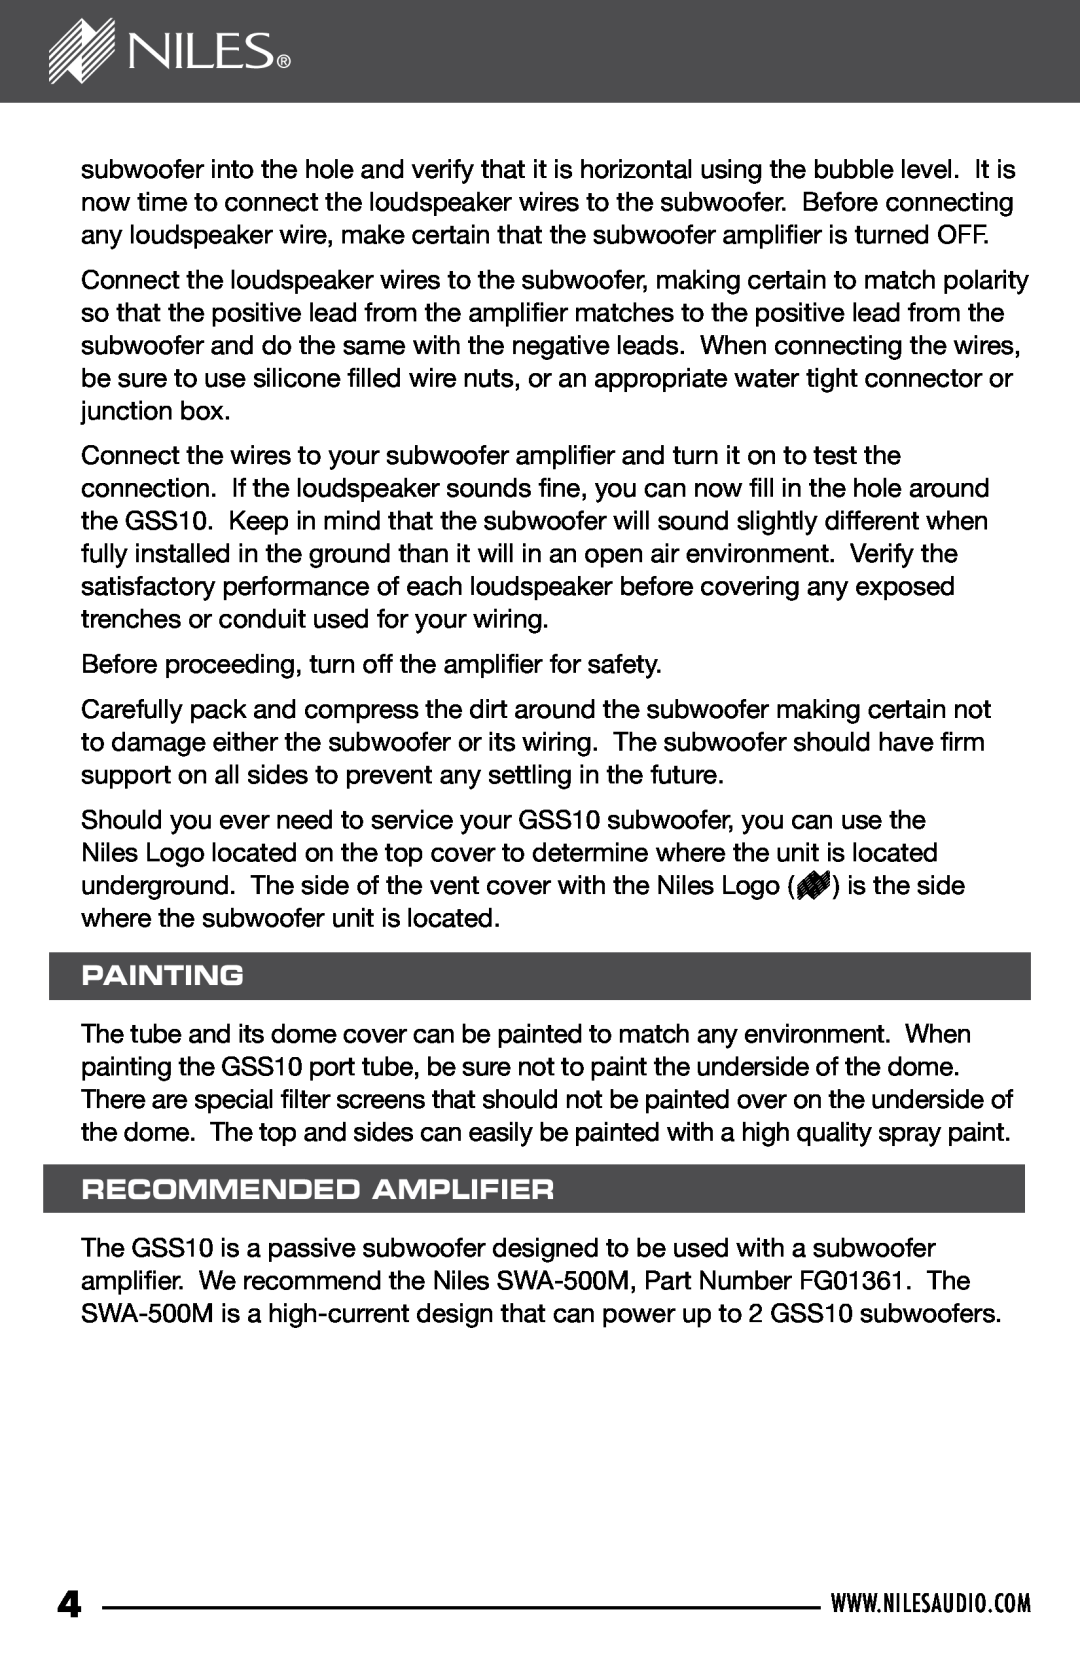 Niles Audio GSS10 manual Painting, Recommended Amplifier 